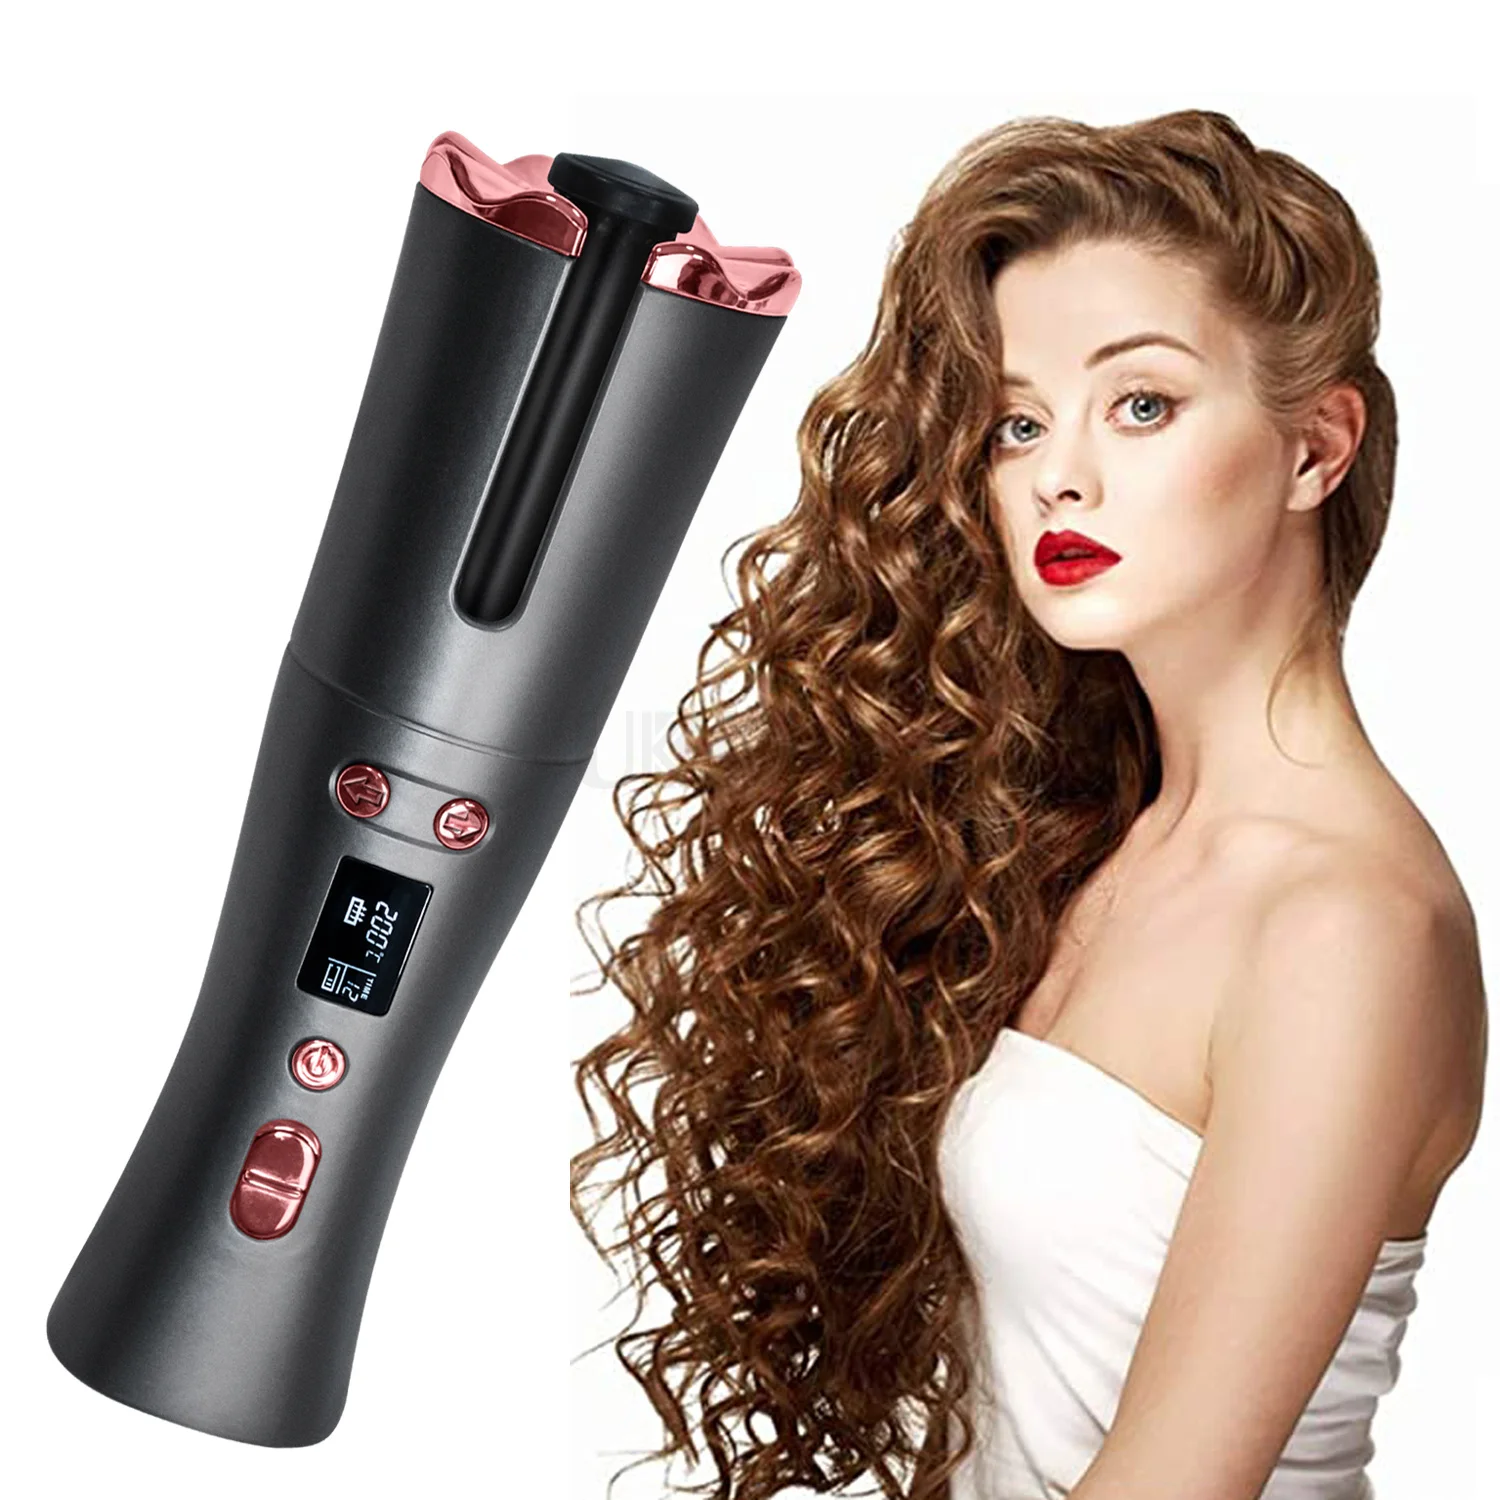 

Cordless Auto Hair Curler USB Rechargeable Curling Iron Automatic Rotation Ceramic Barrel Wand Hair Waver With LCD Display